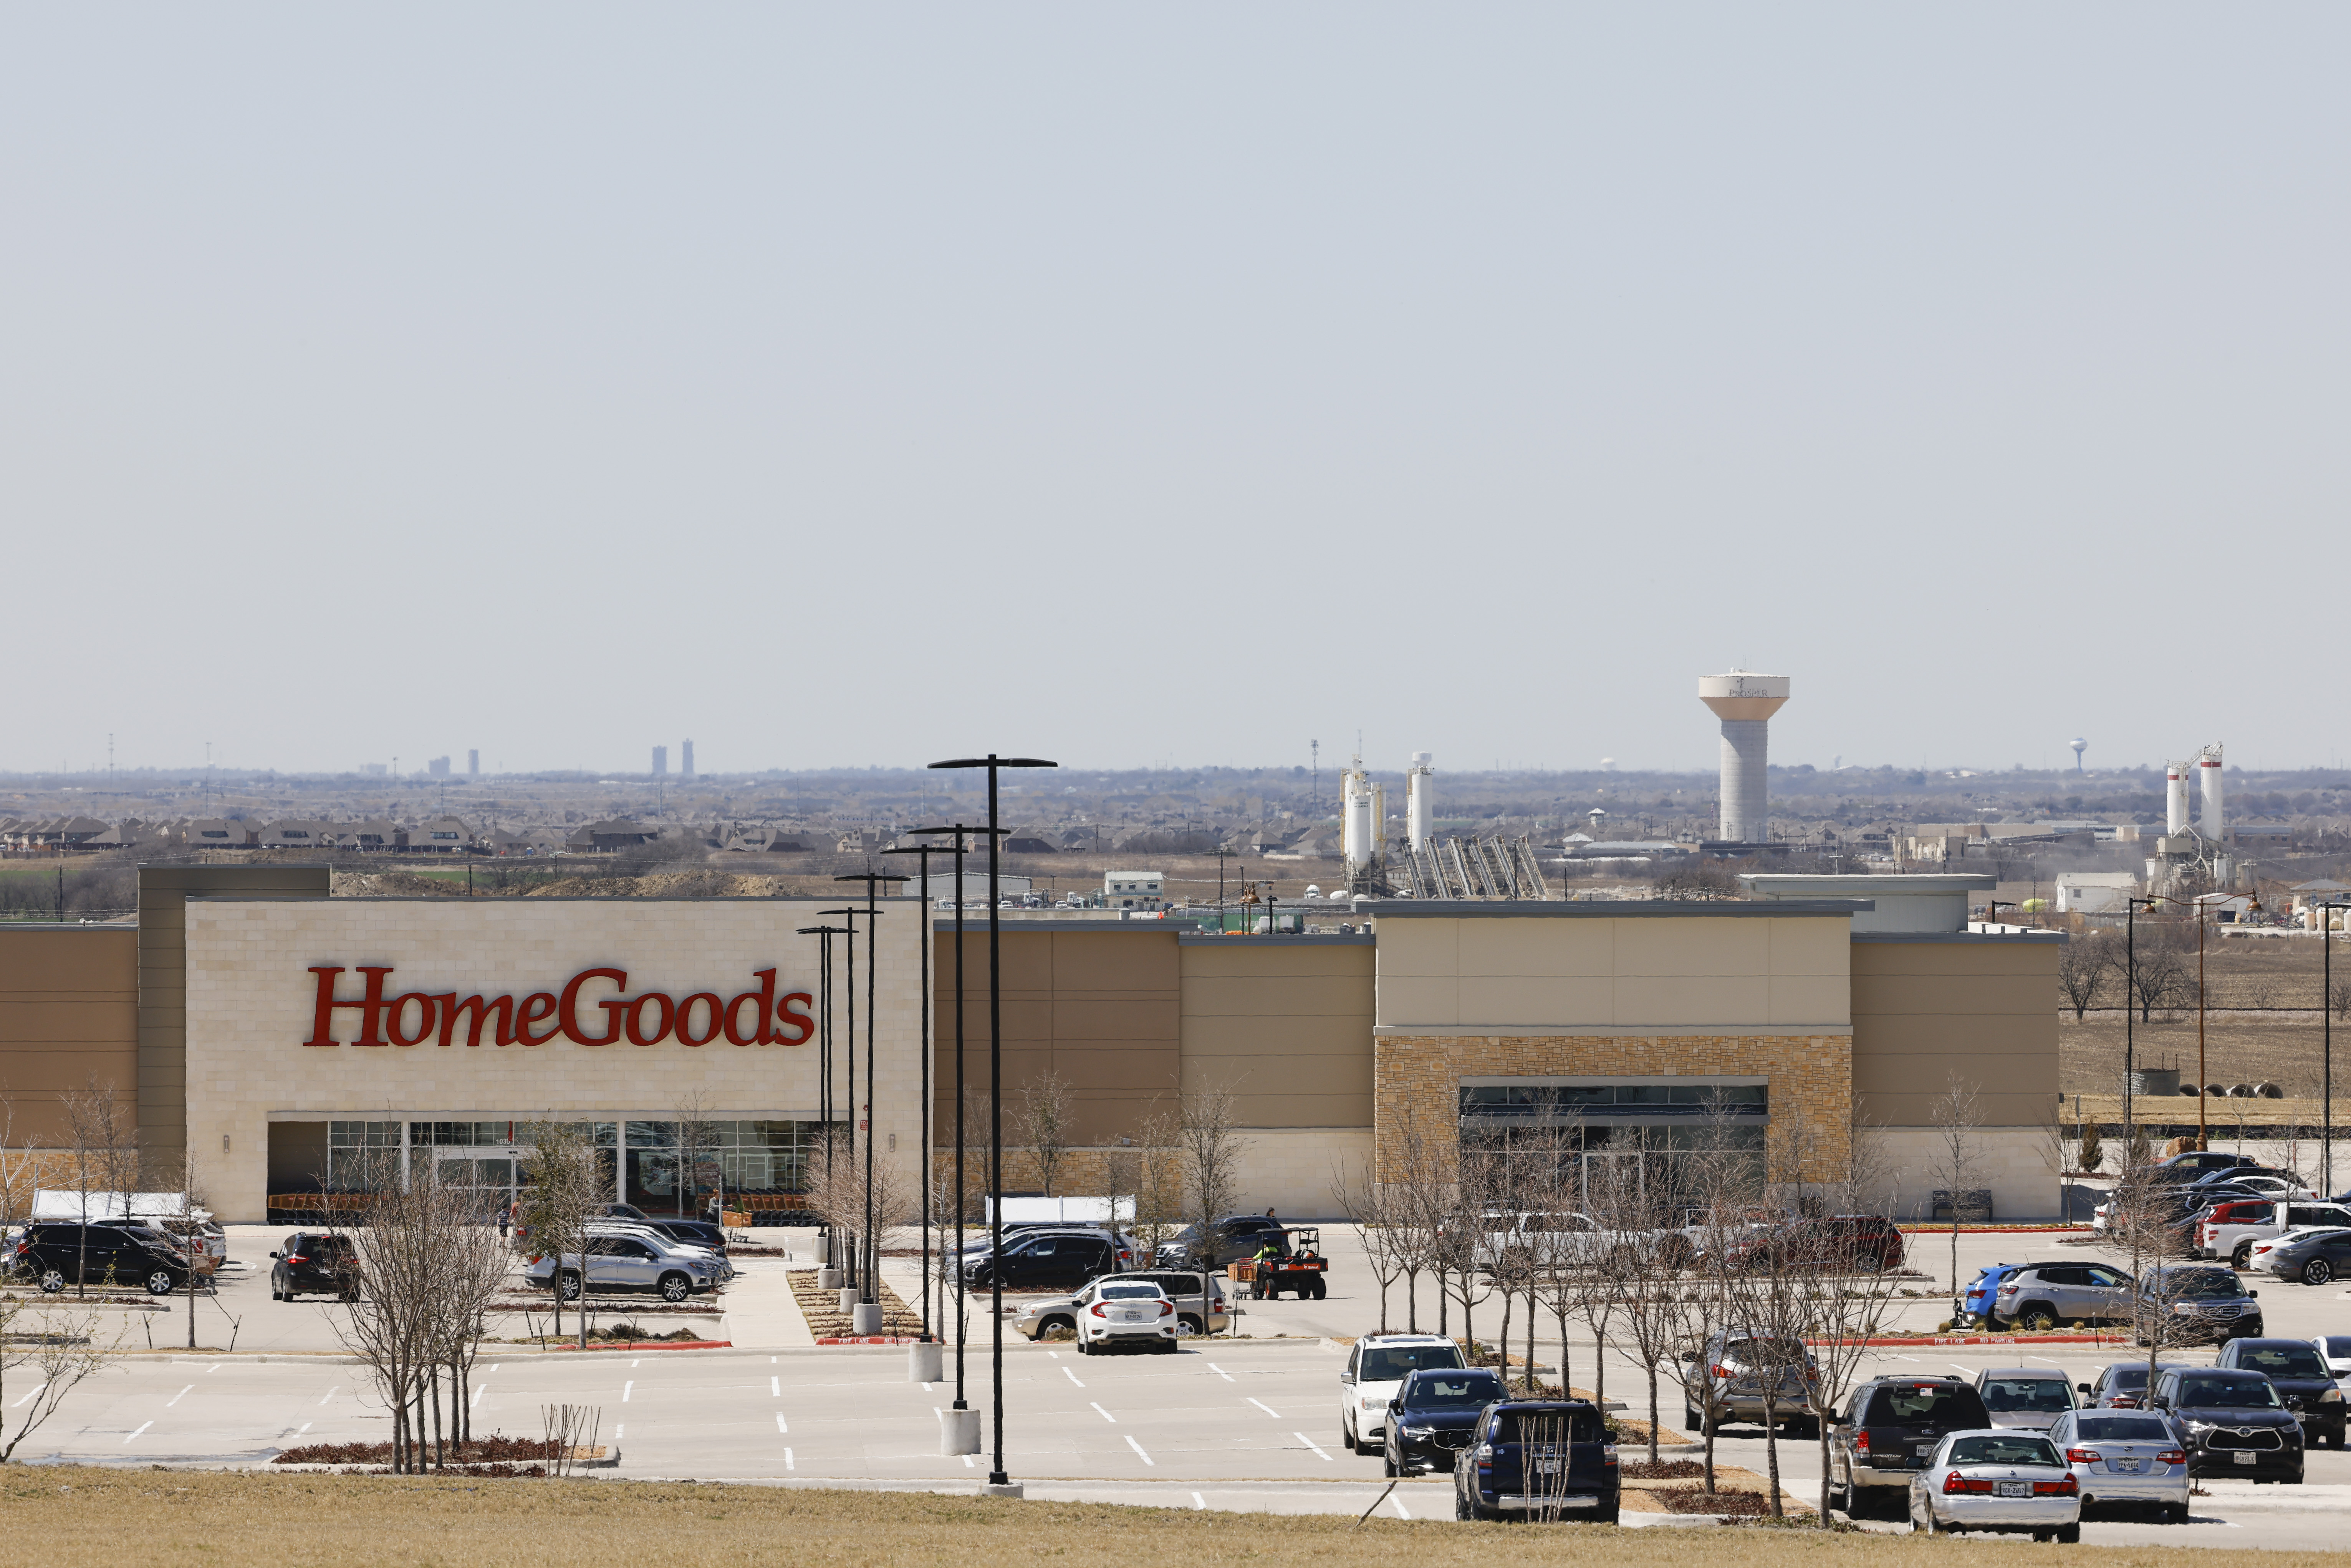 HomeGoods gives up on online shopping to focus on physical stores